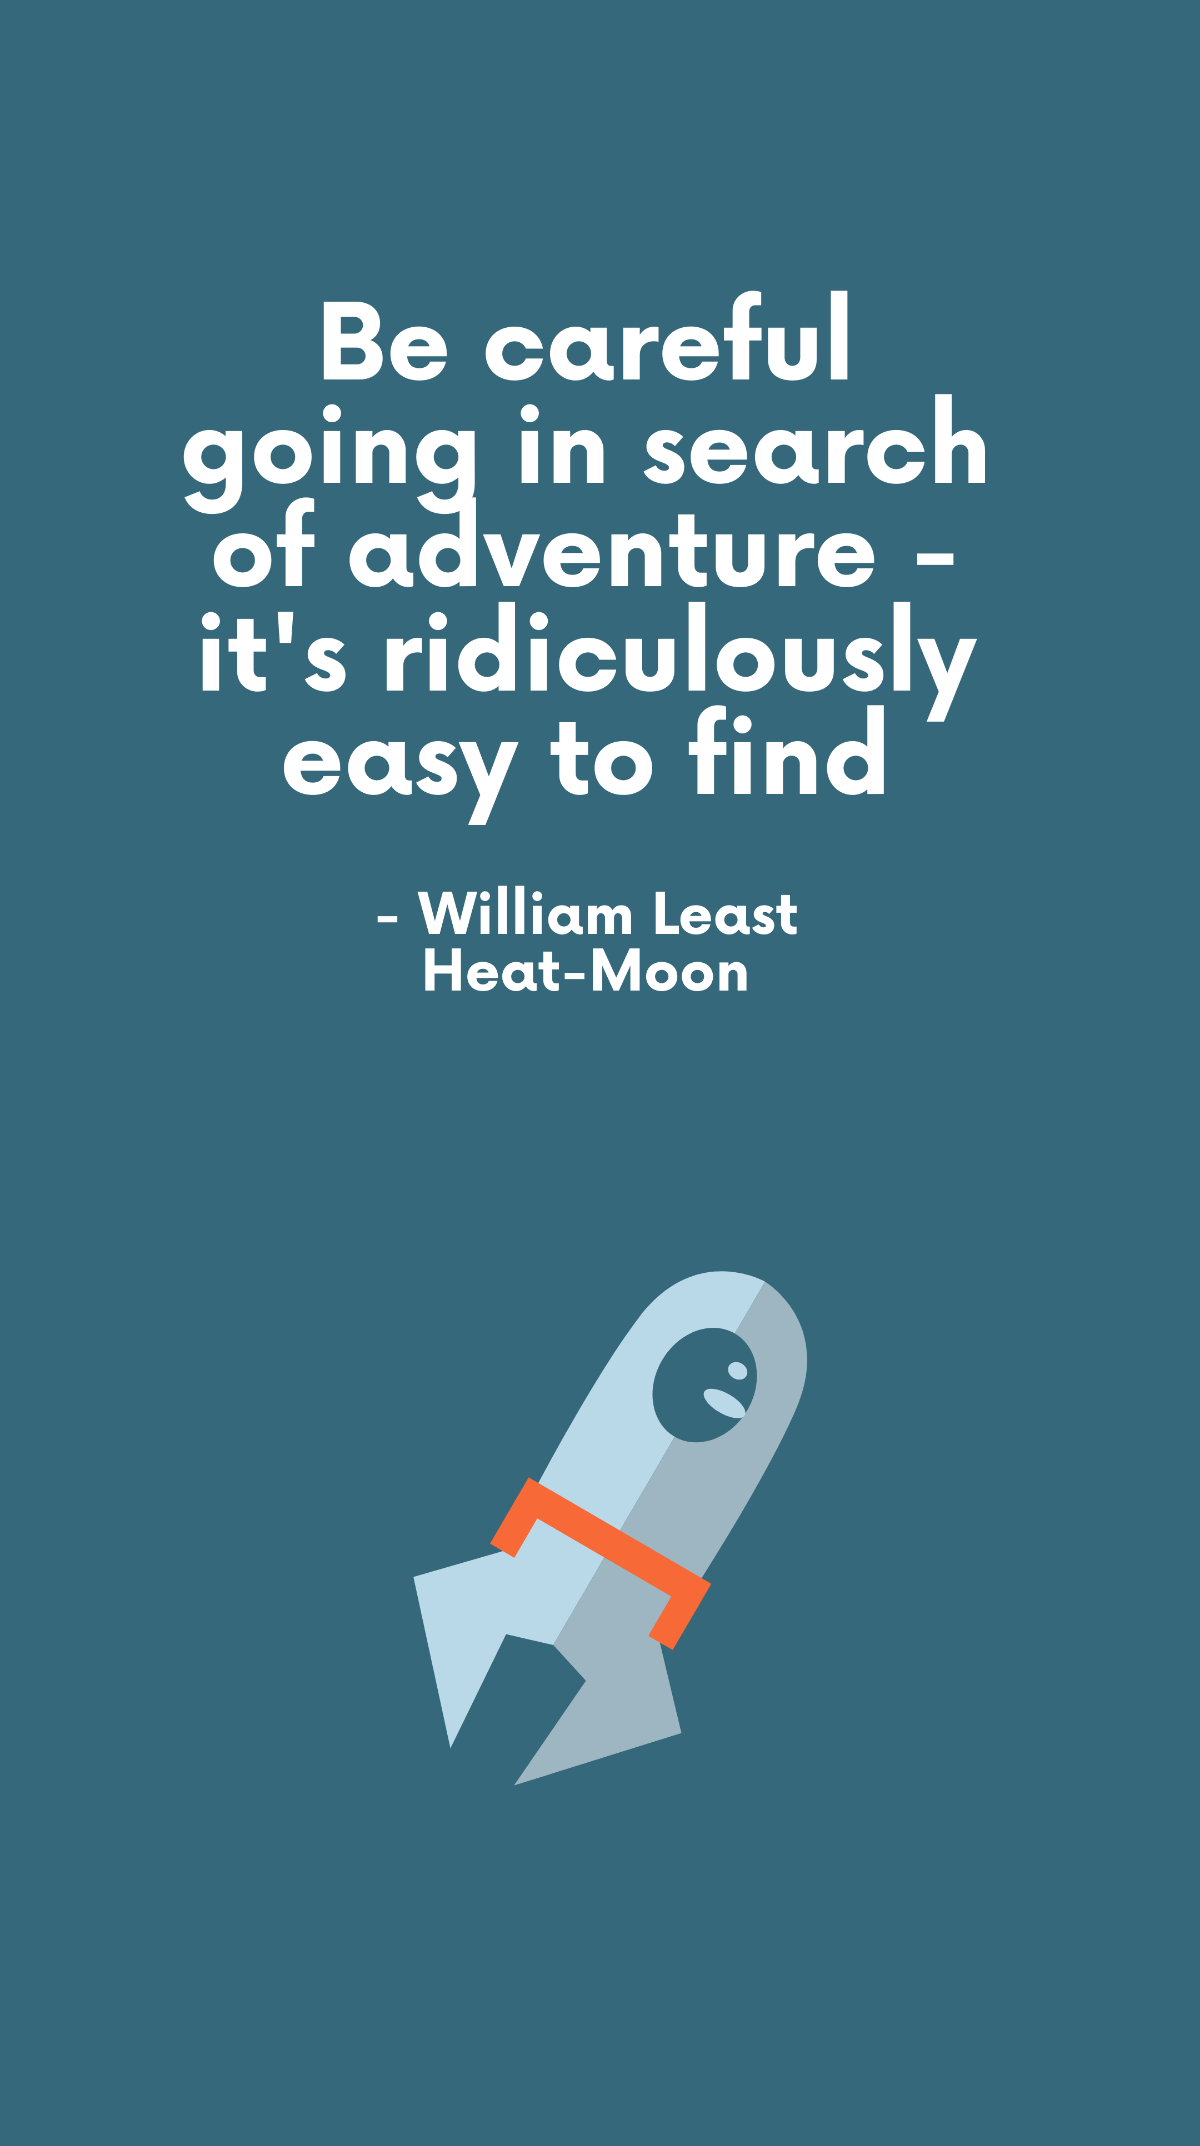 William Least Heat-Moon - Be careful going in search of adventure - it's ridiculously easy to find Template